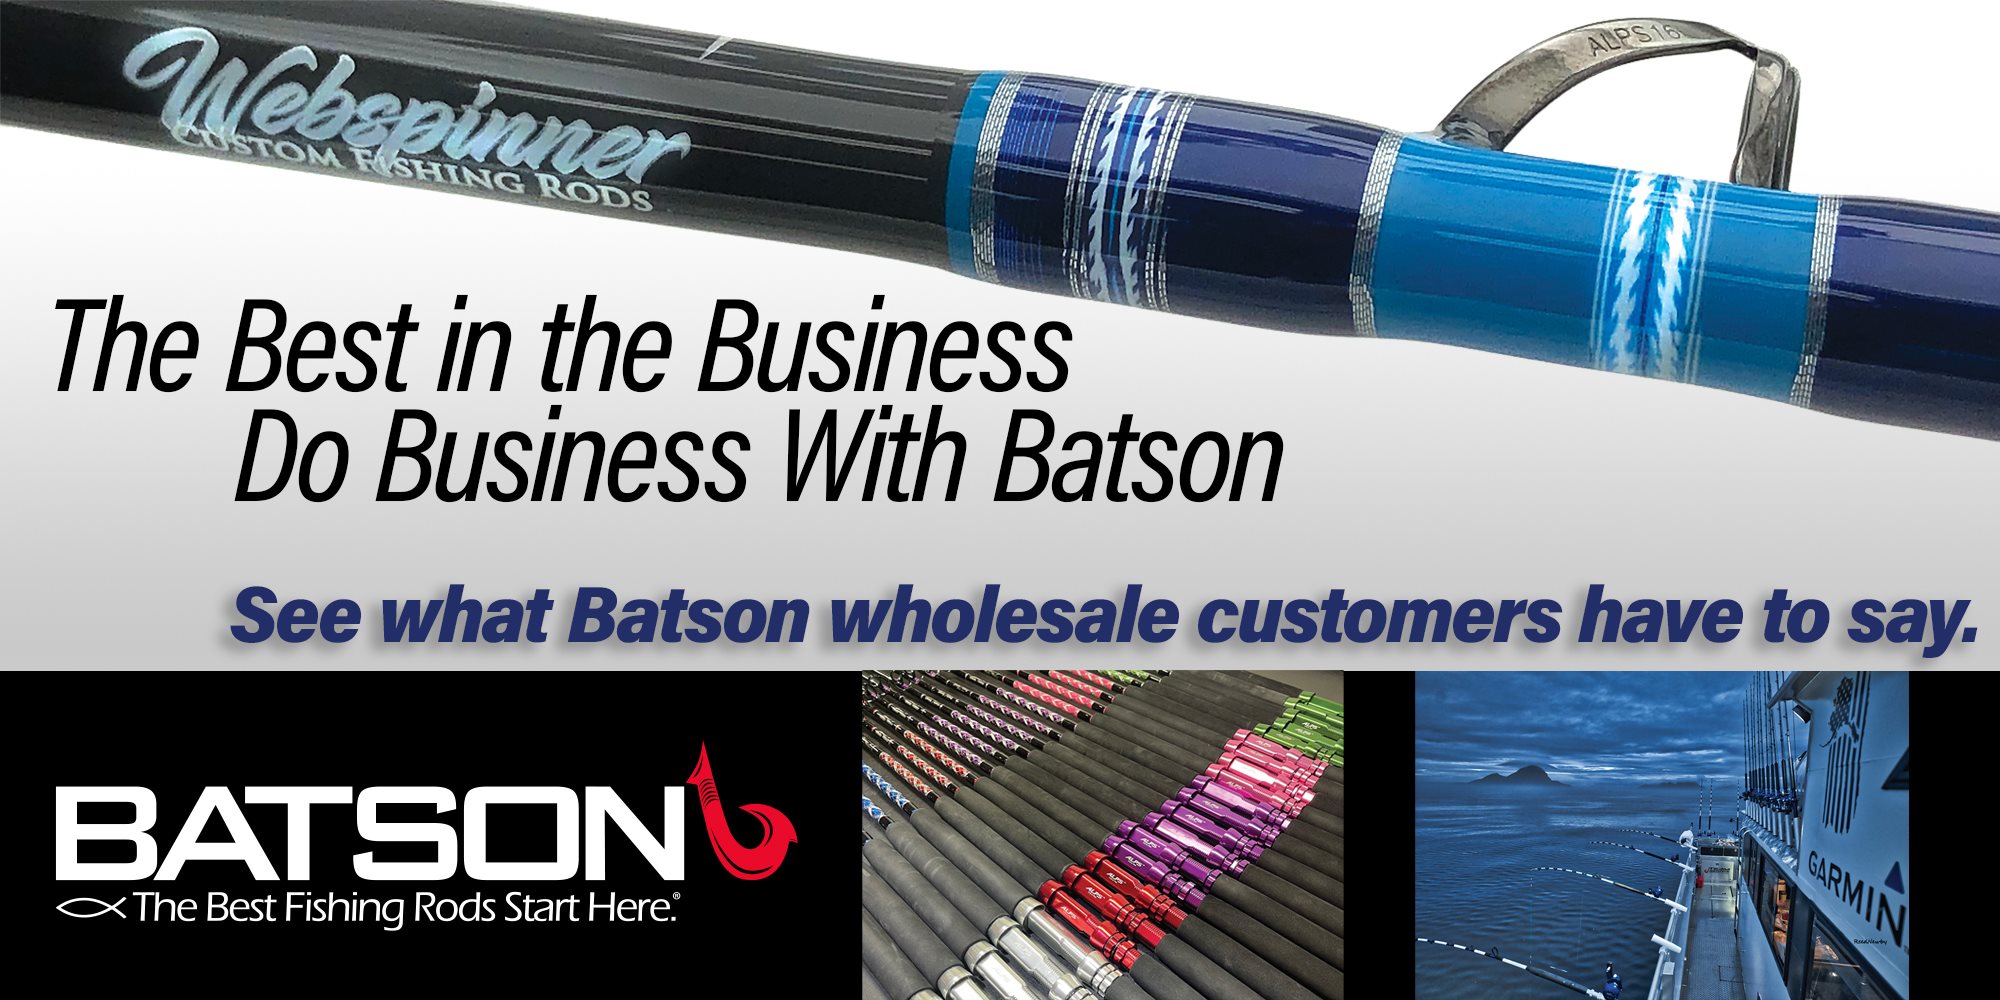 The Best The Business Do Business With Batson